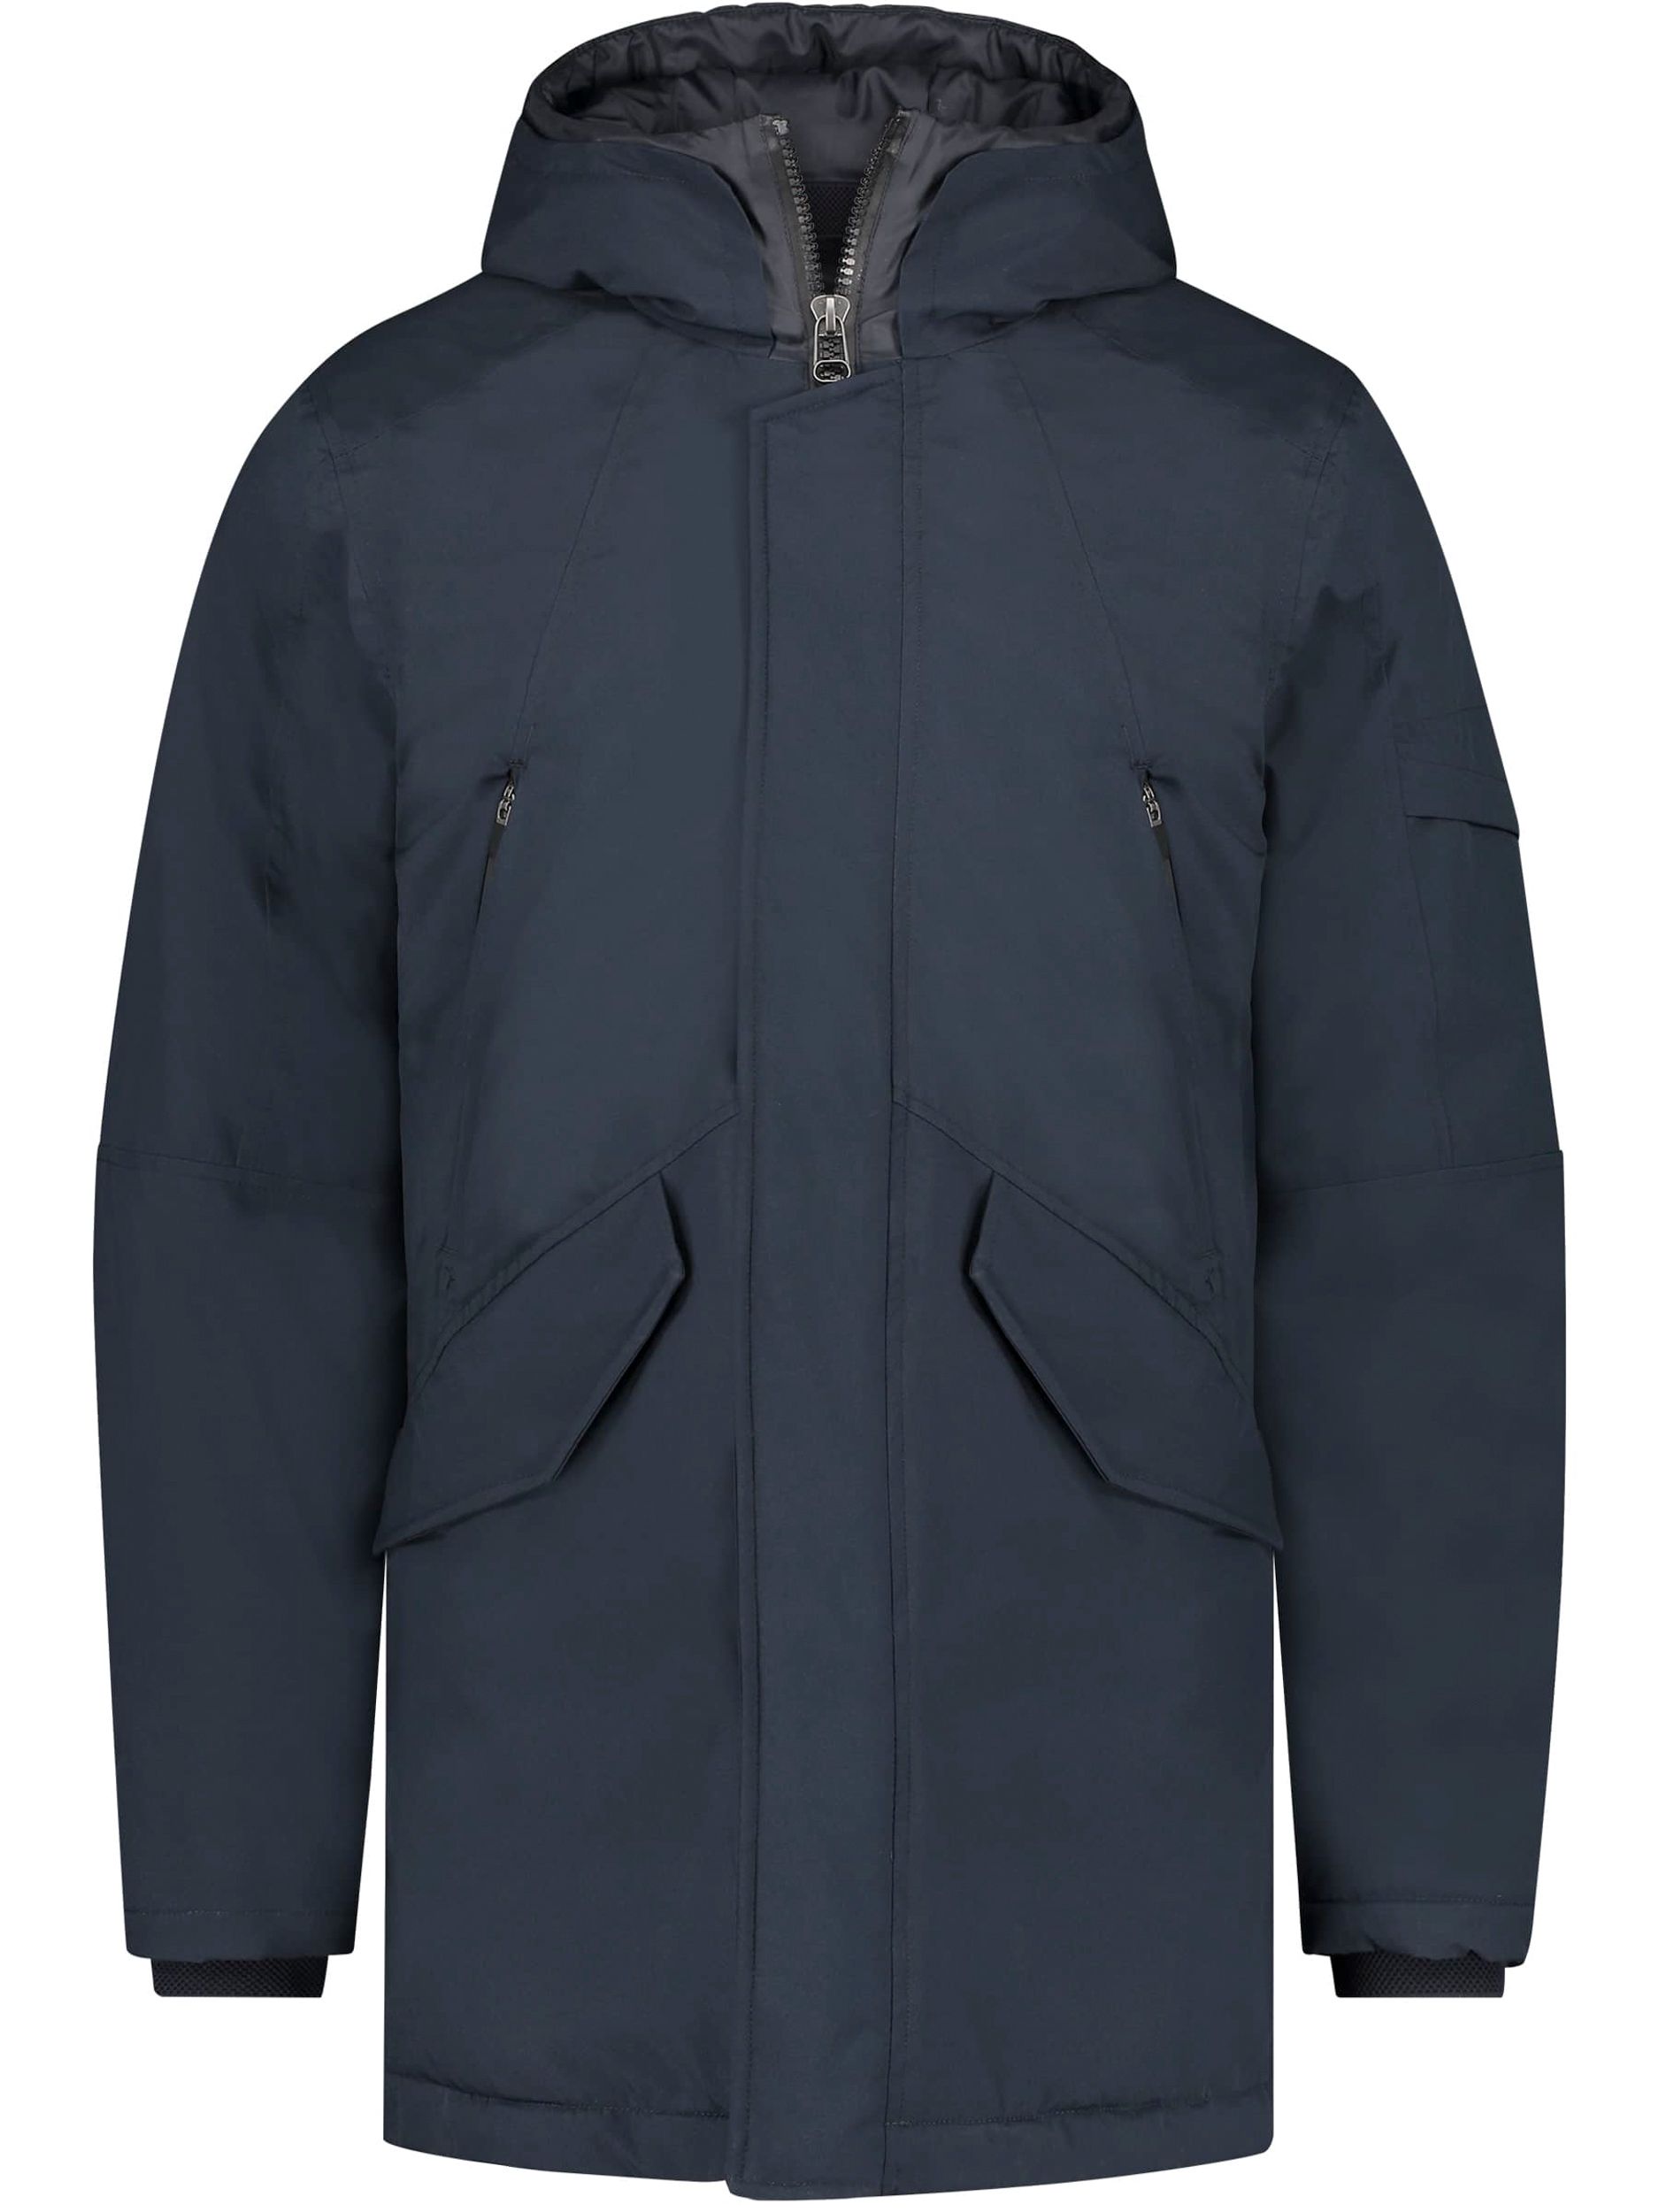 State of Art Parka Donker blauw 081163-001-4XL